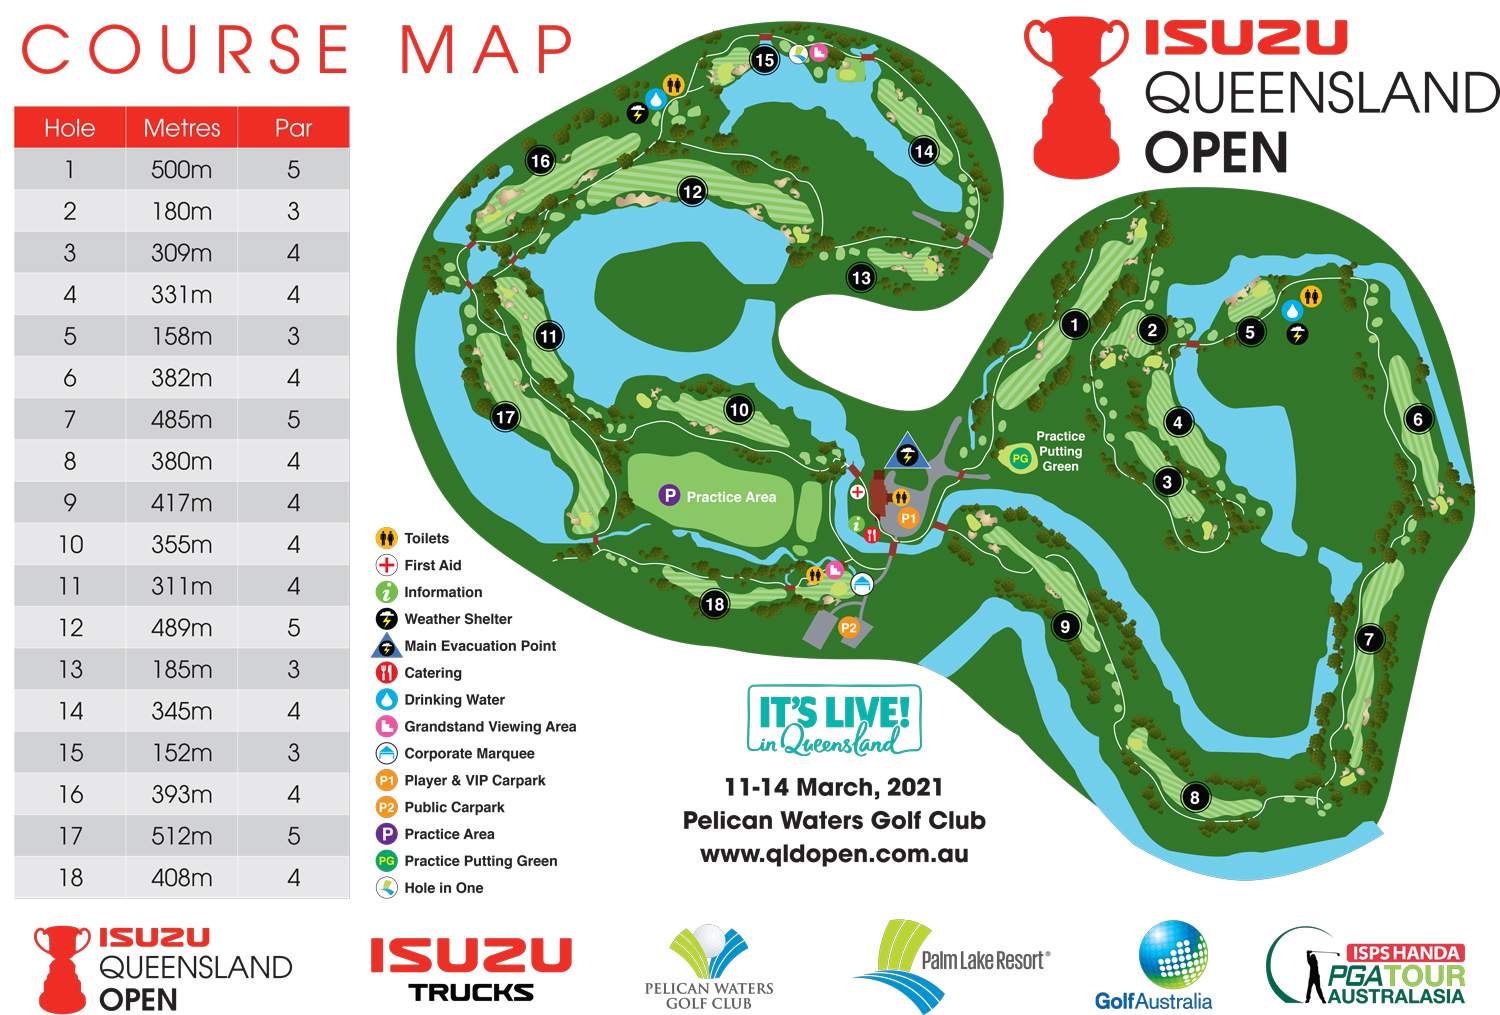 2021 Qld Open course map